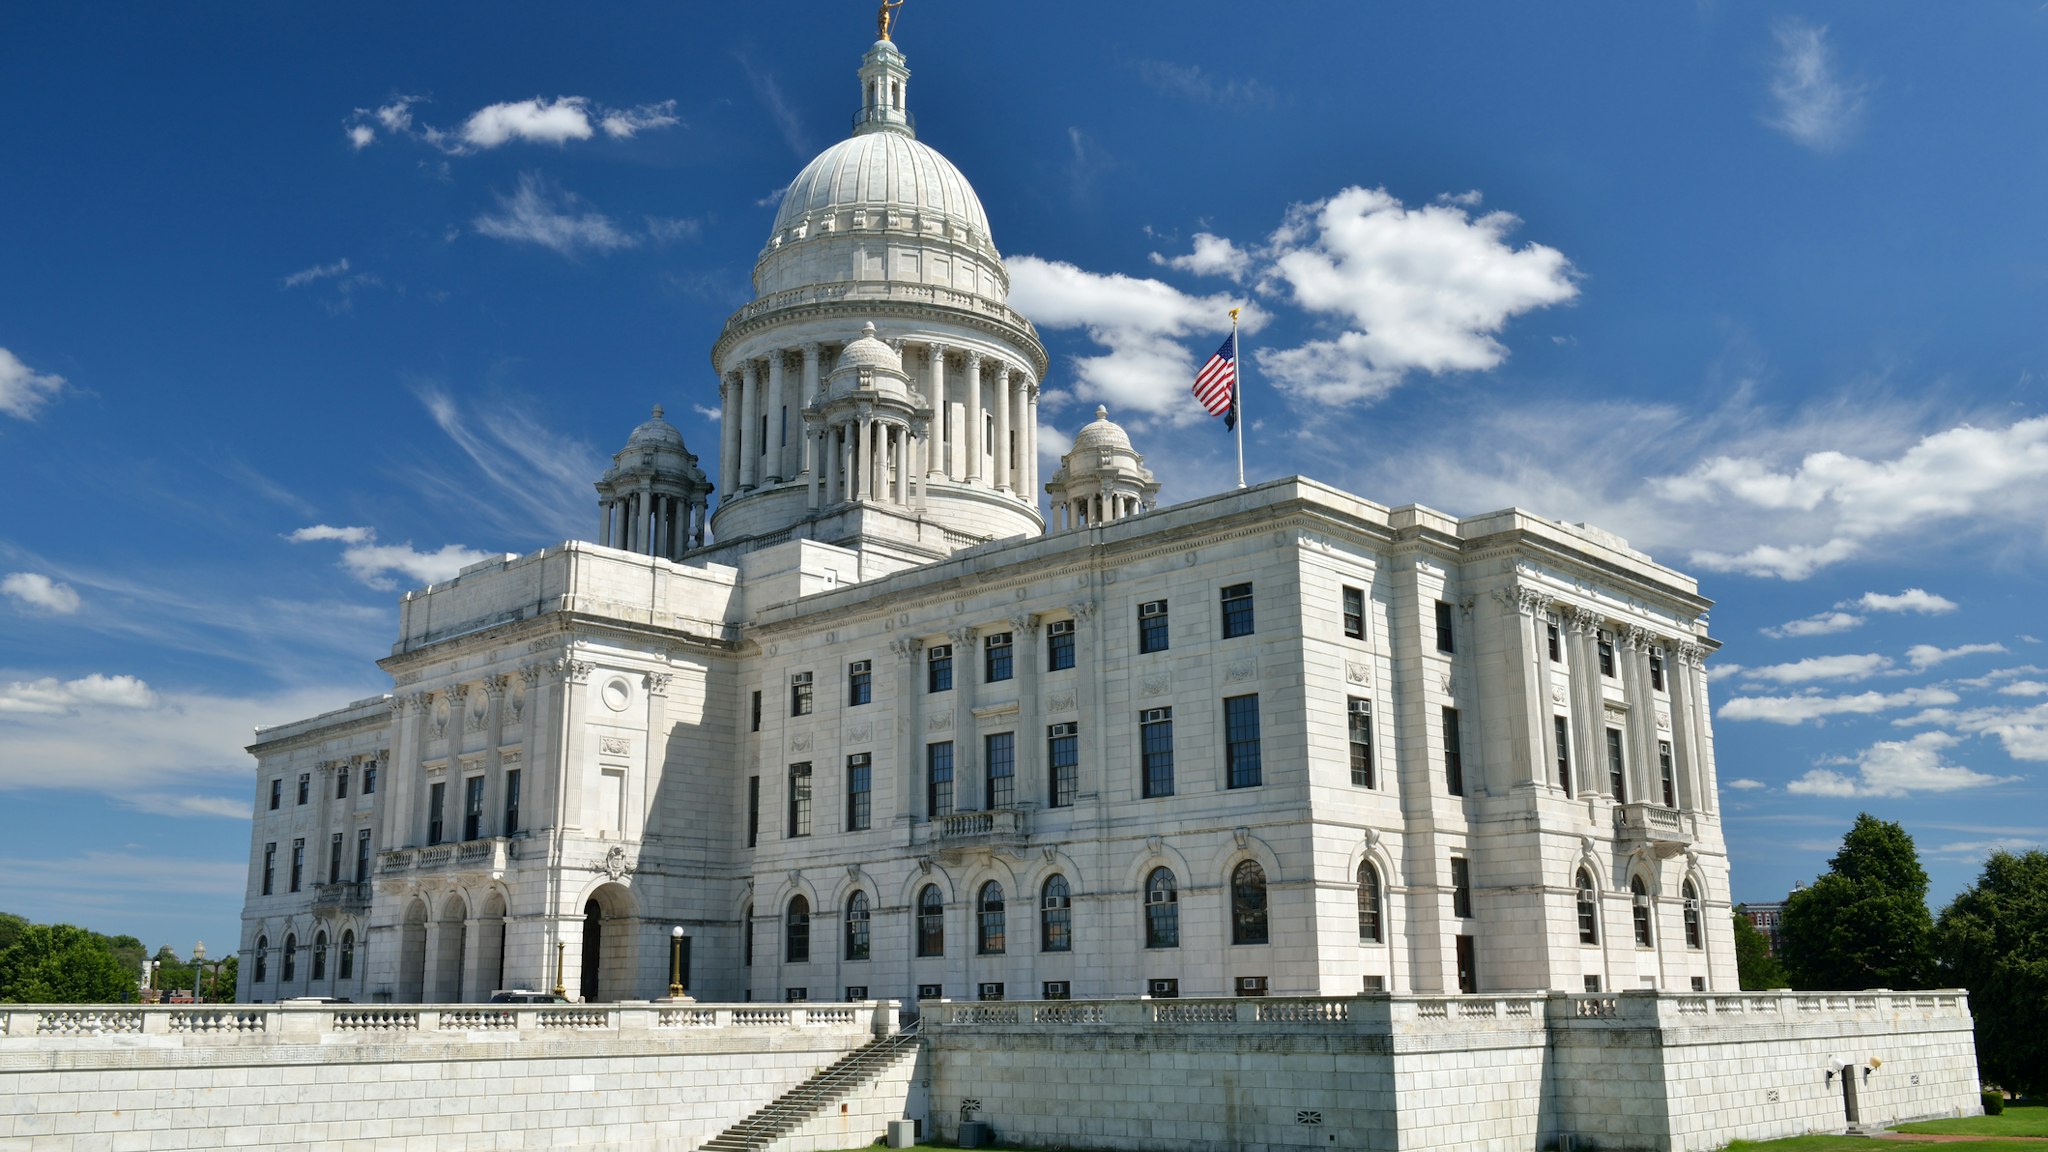 aimintang. Getty Images. The State House of Rhode Island, Providence, USA